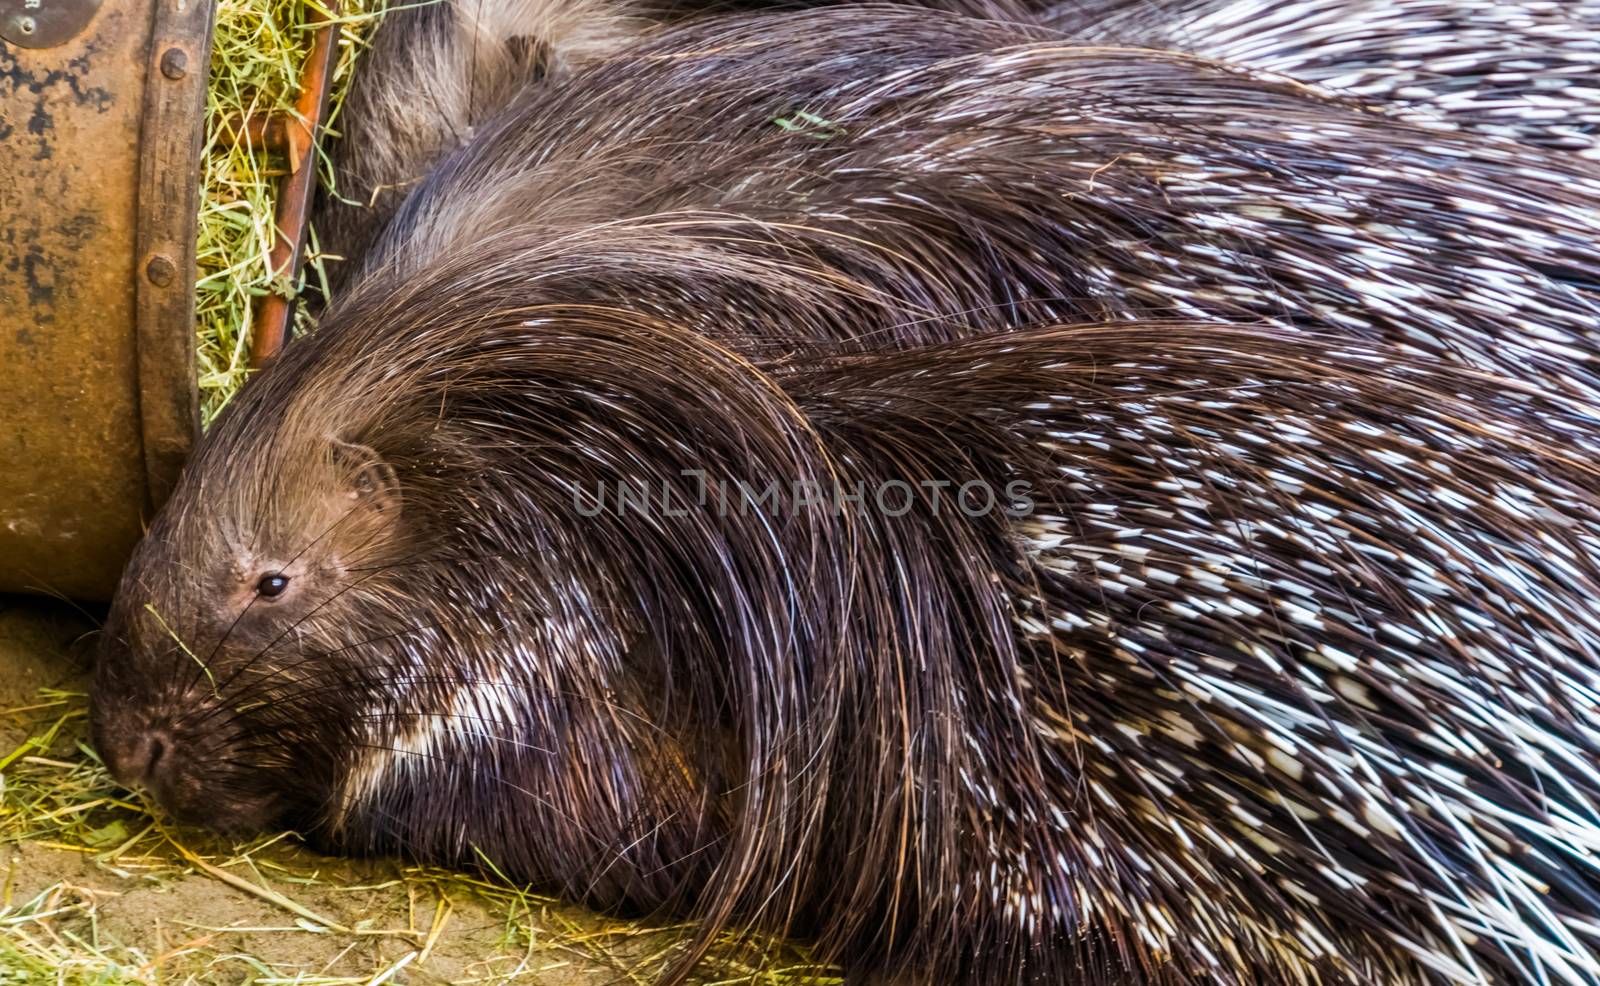 the face of a indian crested porcupine in closeup, popular tropical animal specie from Asia